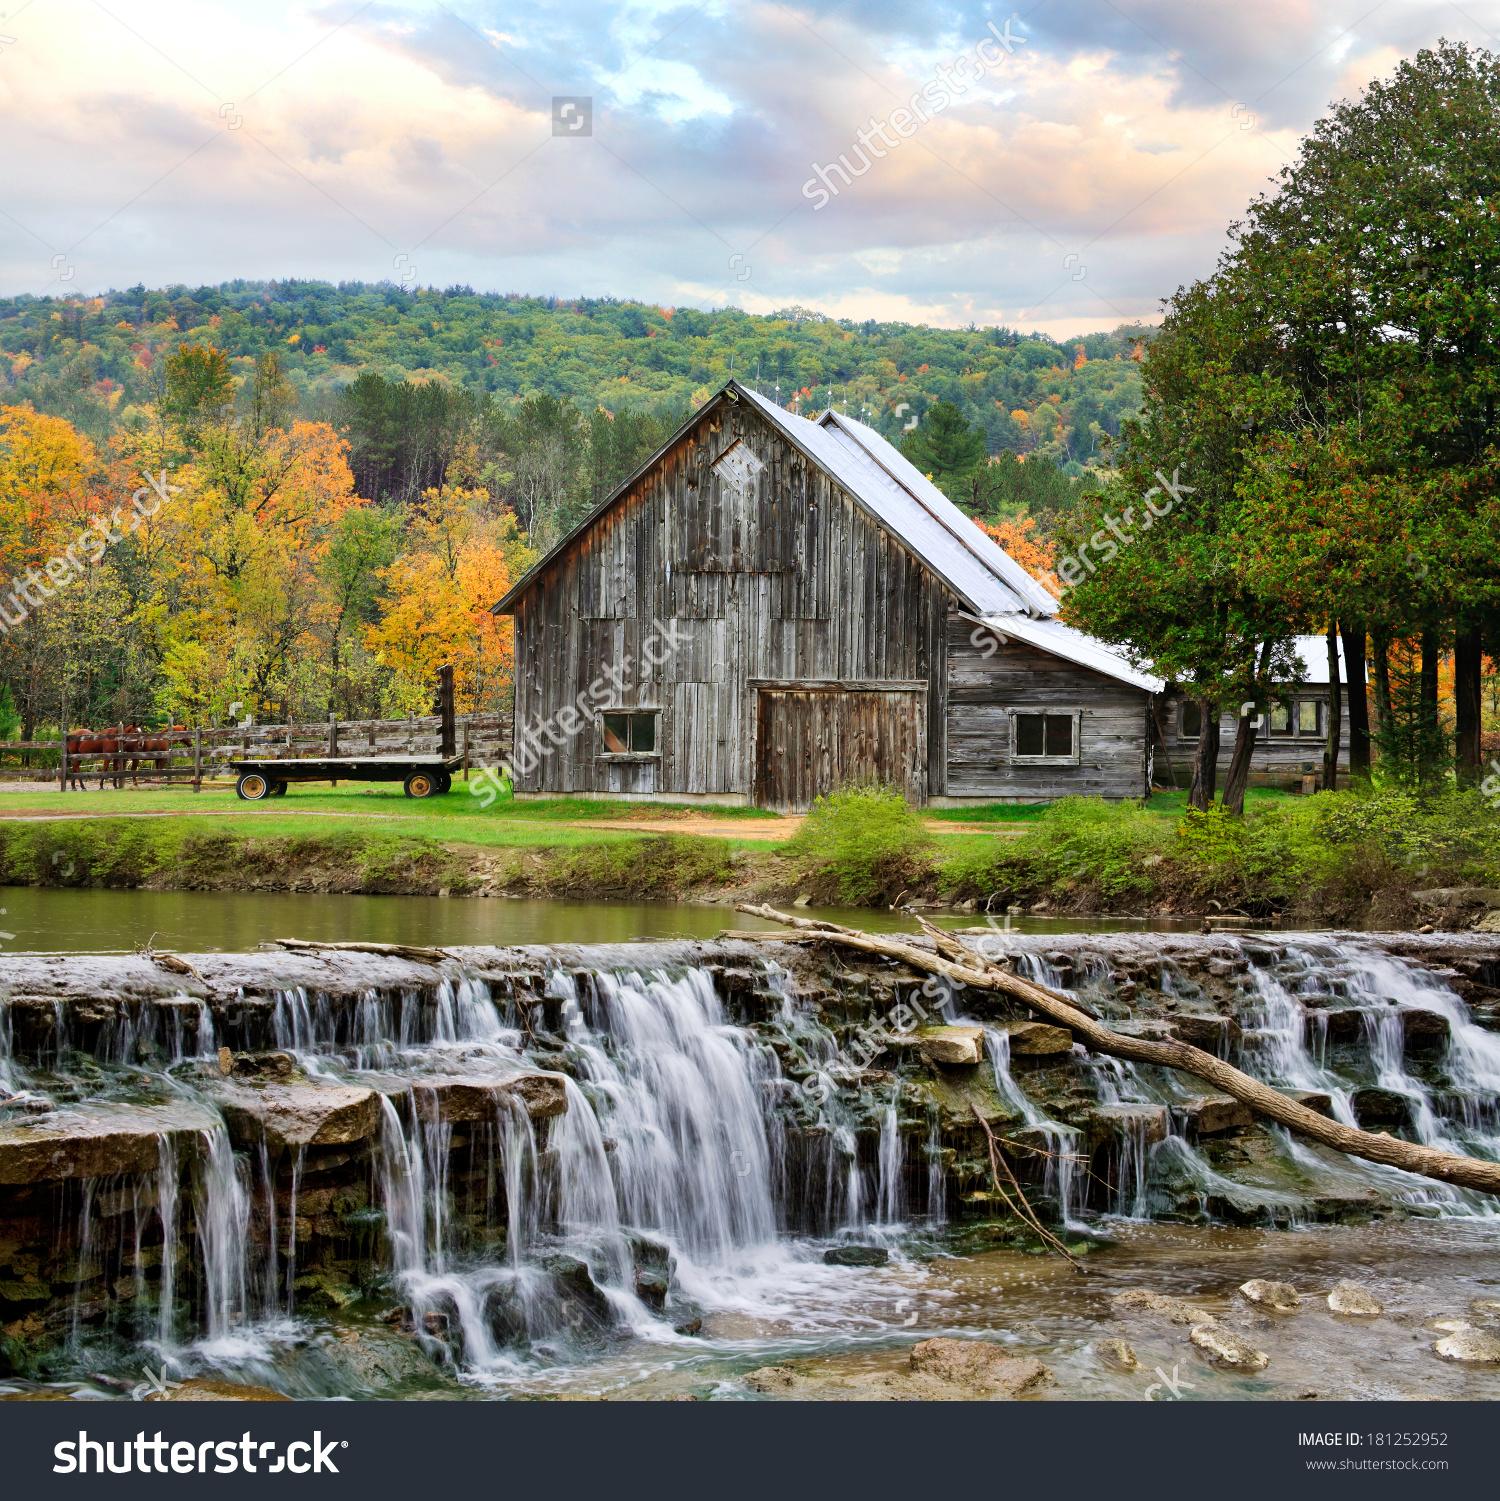 Pastoral Scene Old Barn Waterfall During Stock Photo 181252952.